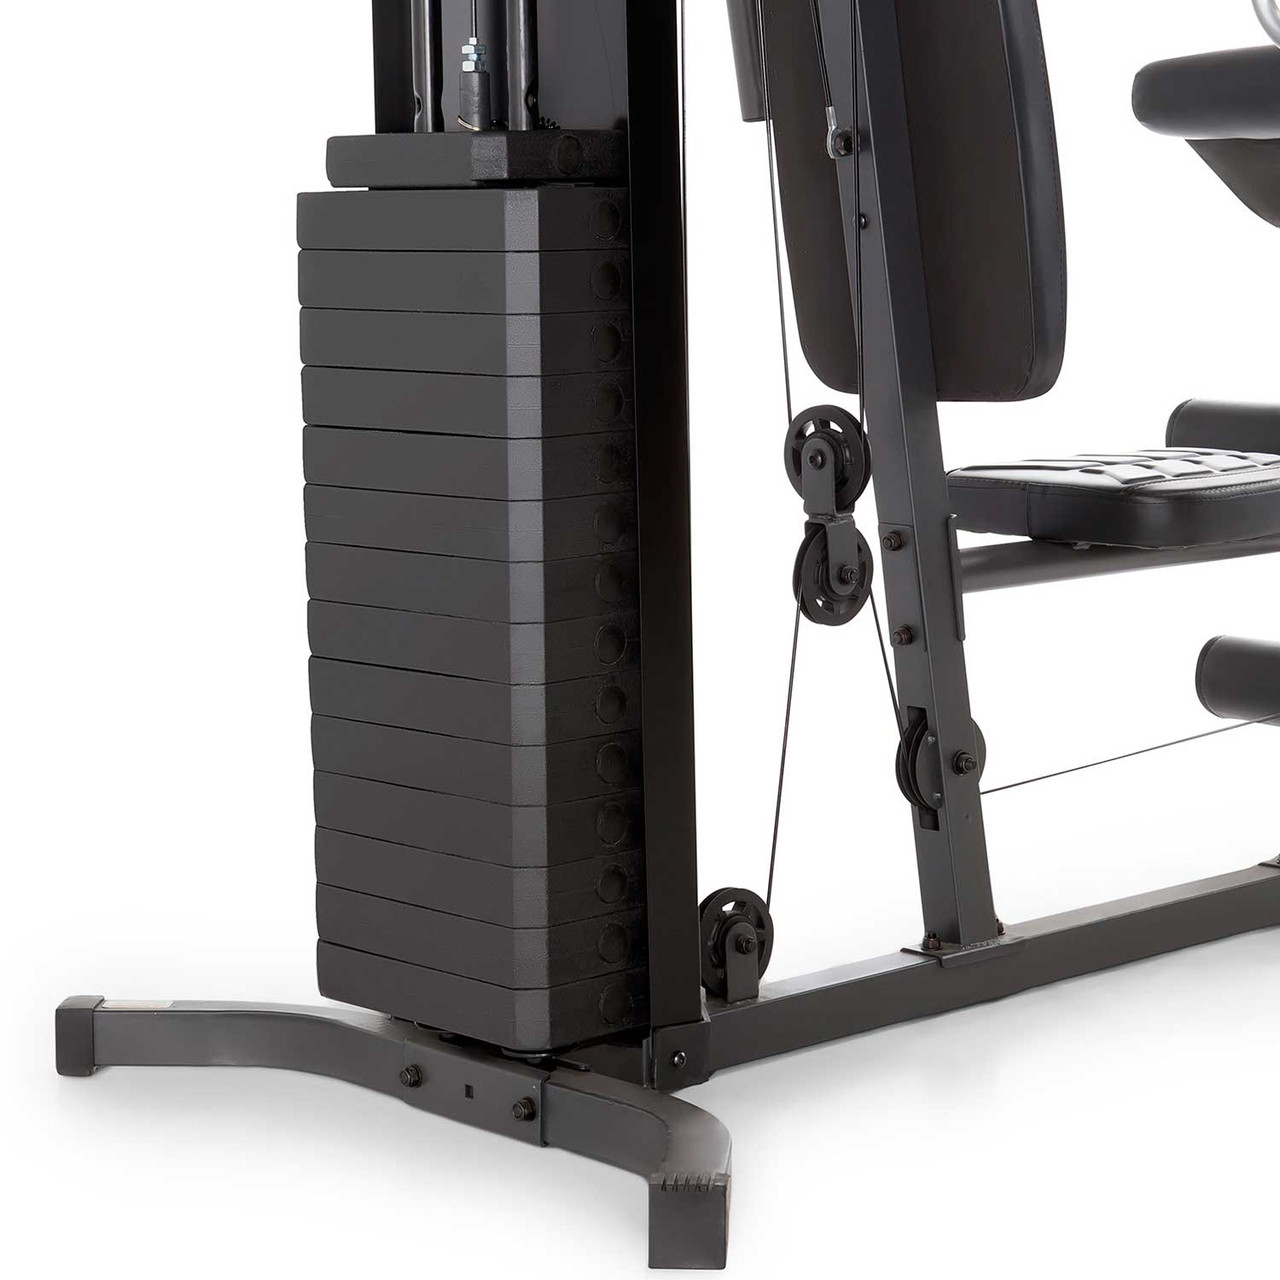 The Marcy 150 Lb. Stack Home Gym Mwm 1005 Has Adjustable Weights That Are Lockable To Ensure Safety 04782